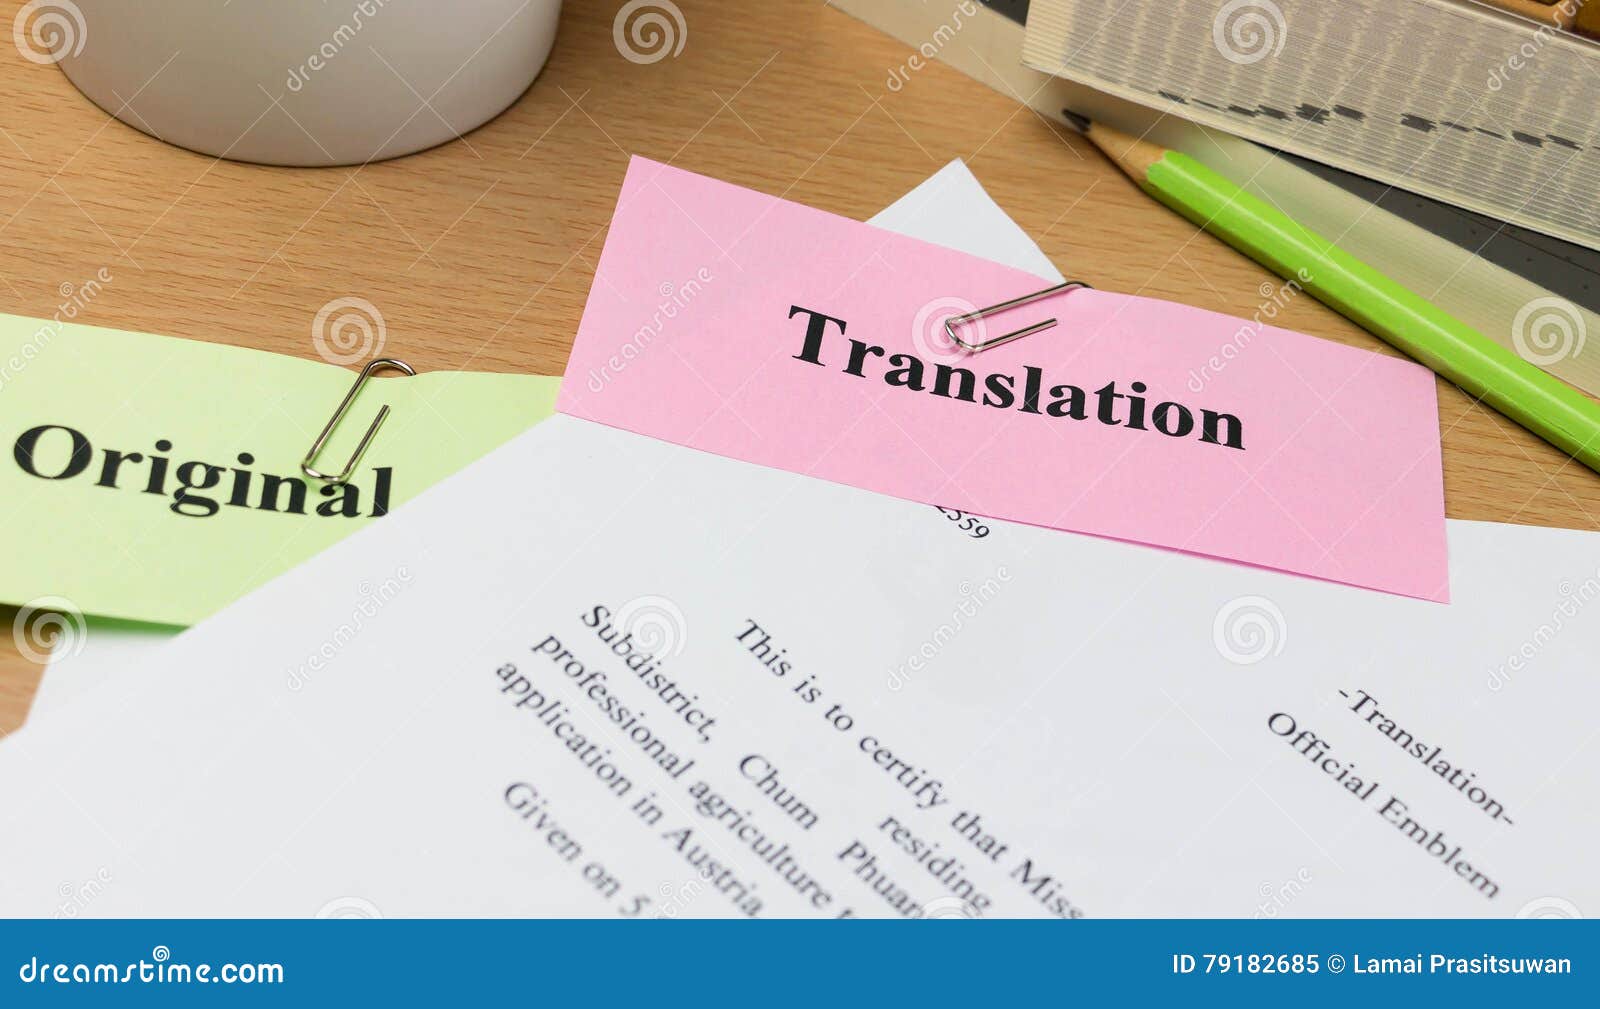 translation paper on wooden table